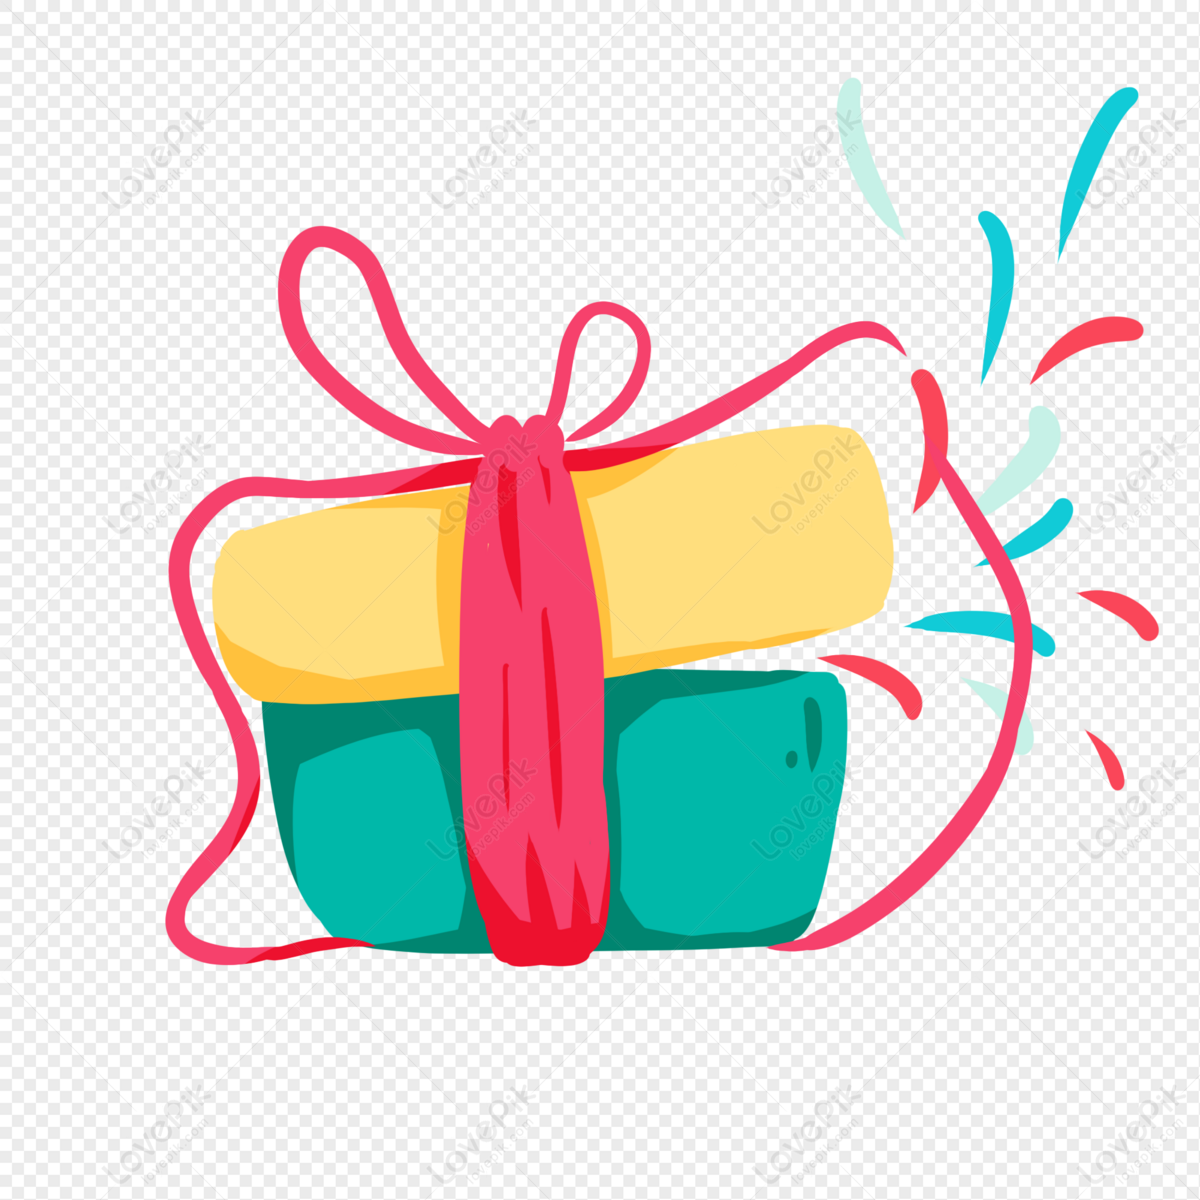 Open Gift Box PNG Picture And Clipart Image For Free Download - Lovepik |  401210495